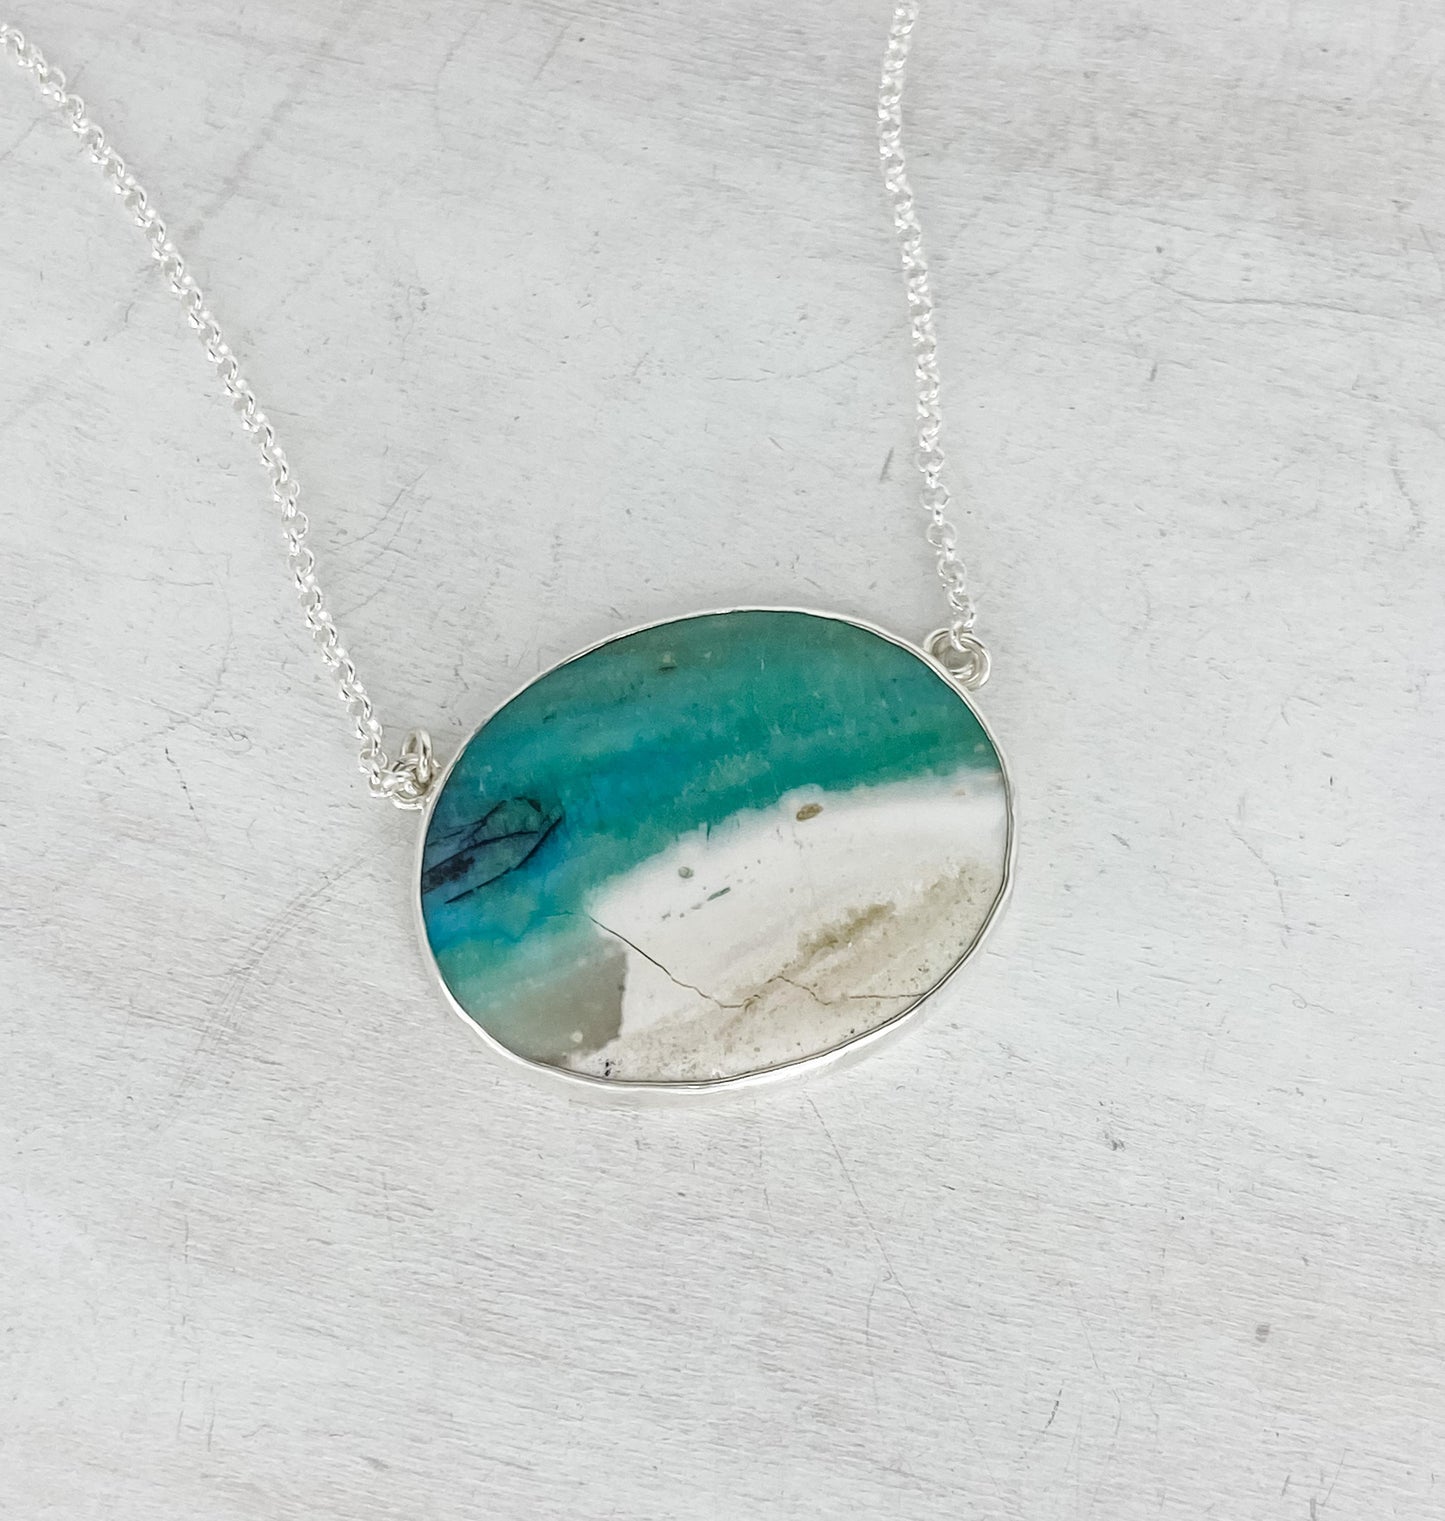 Oval Opalized Wood Pendant with Branch Coral